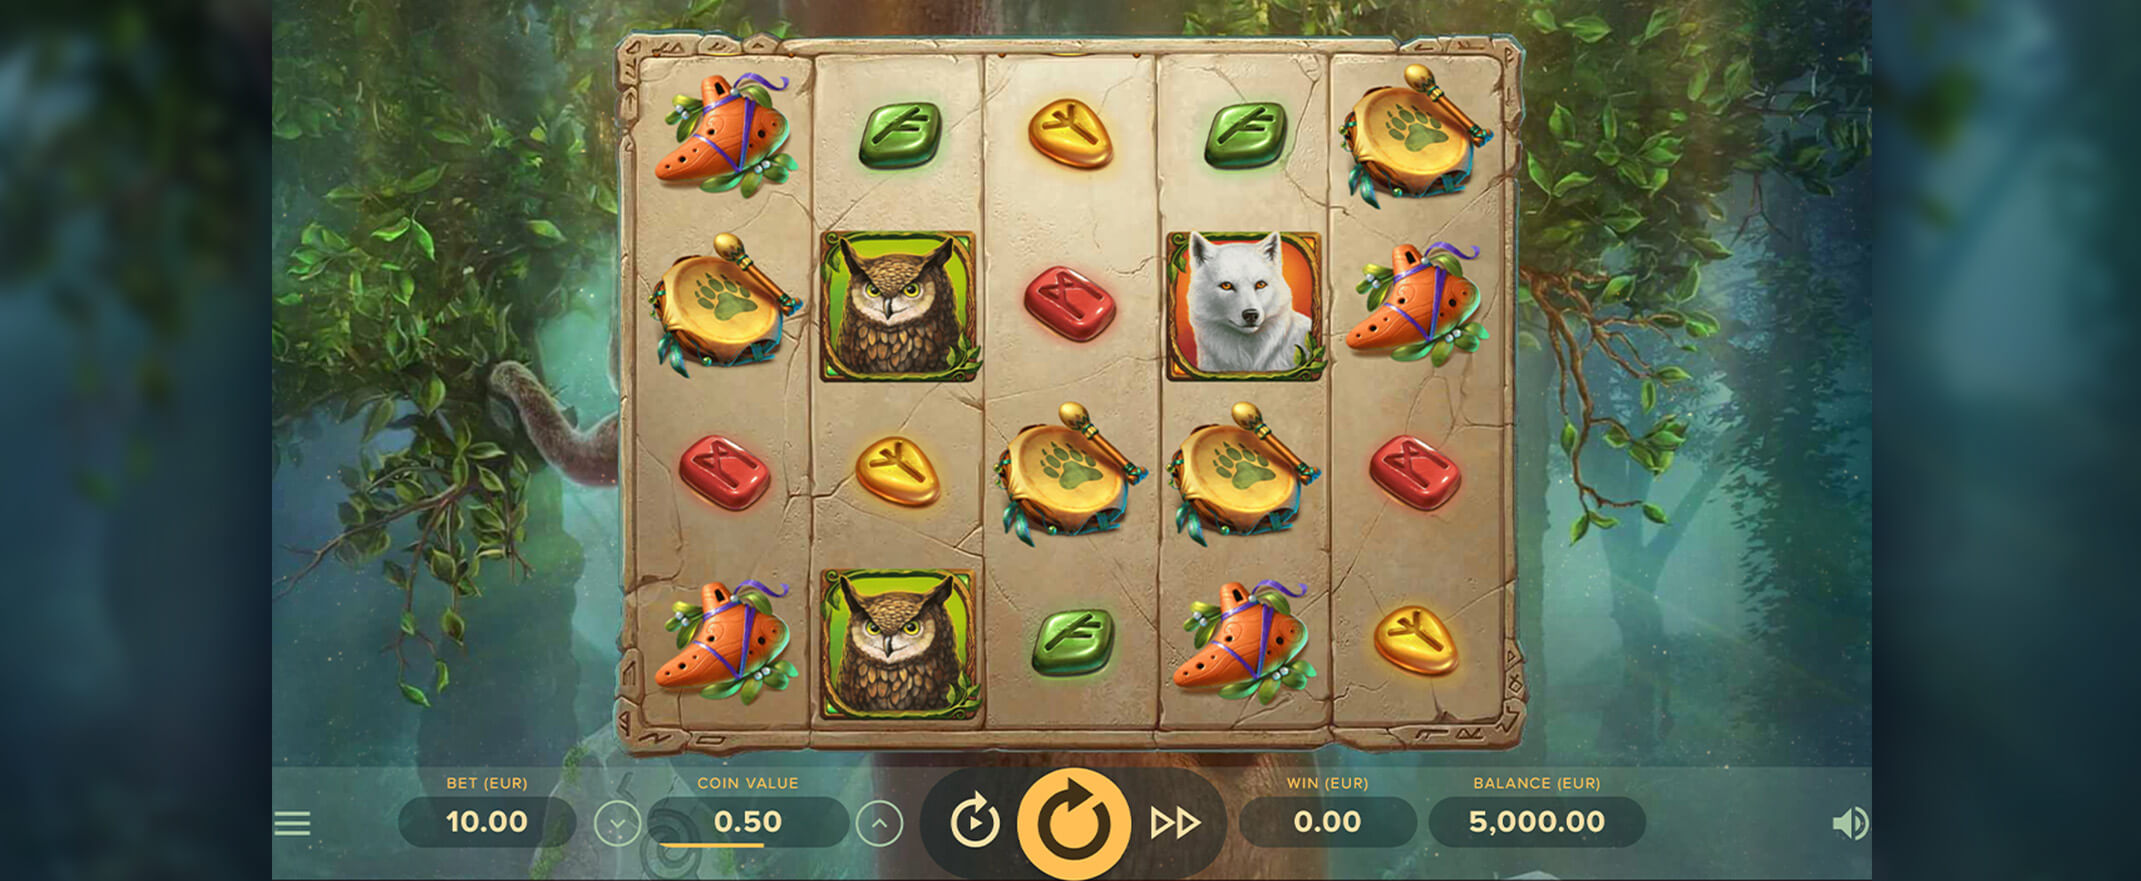 Druids’ Dream Slot Review, image of the reels and symbols